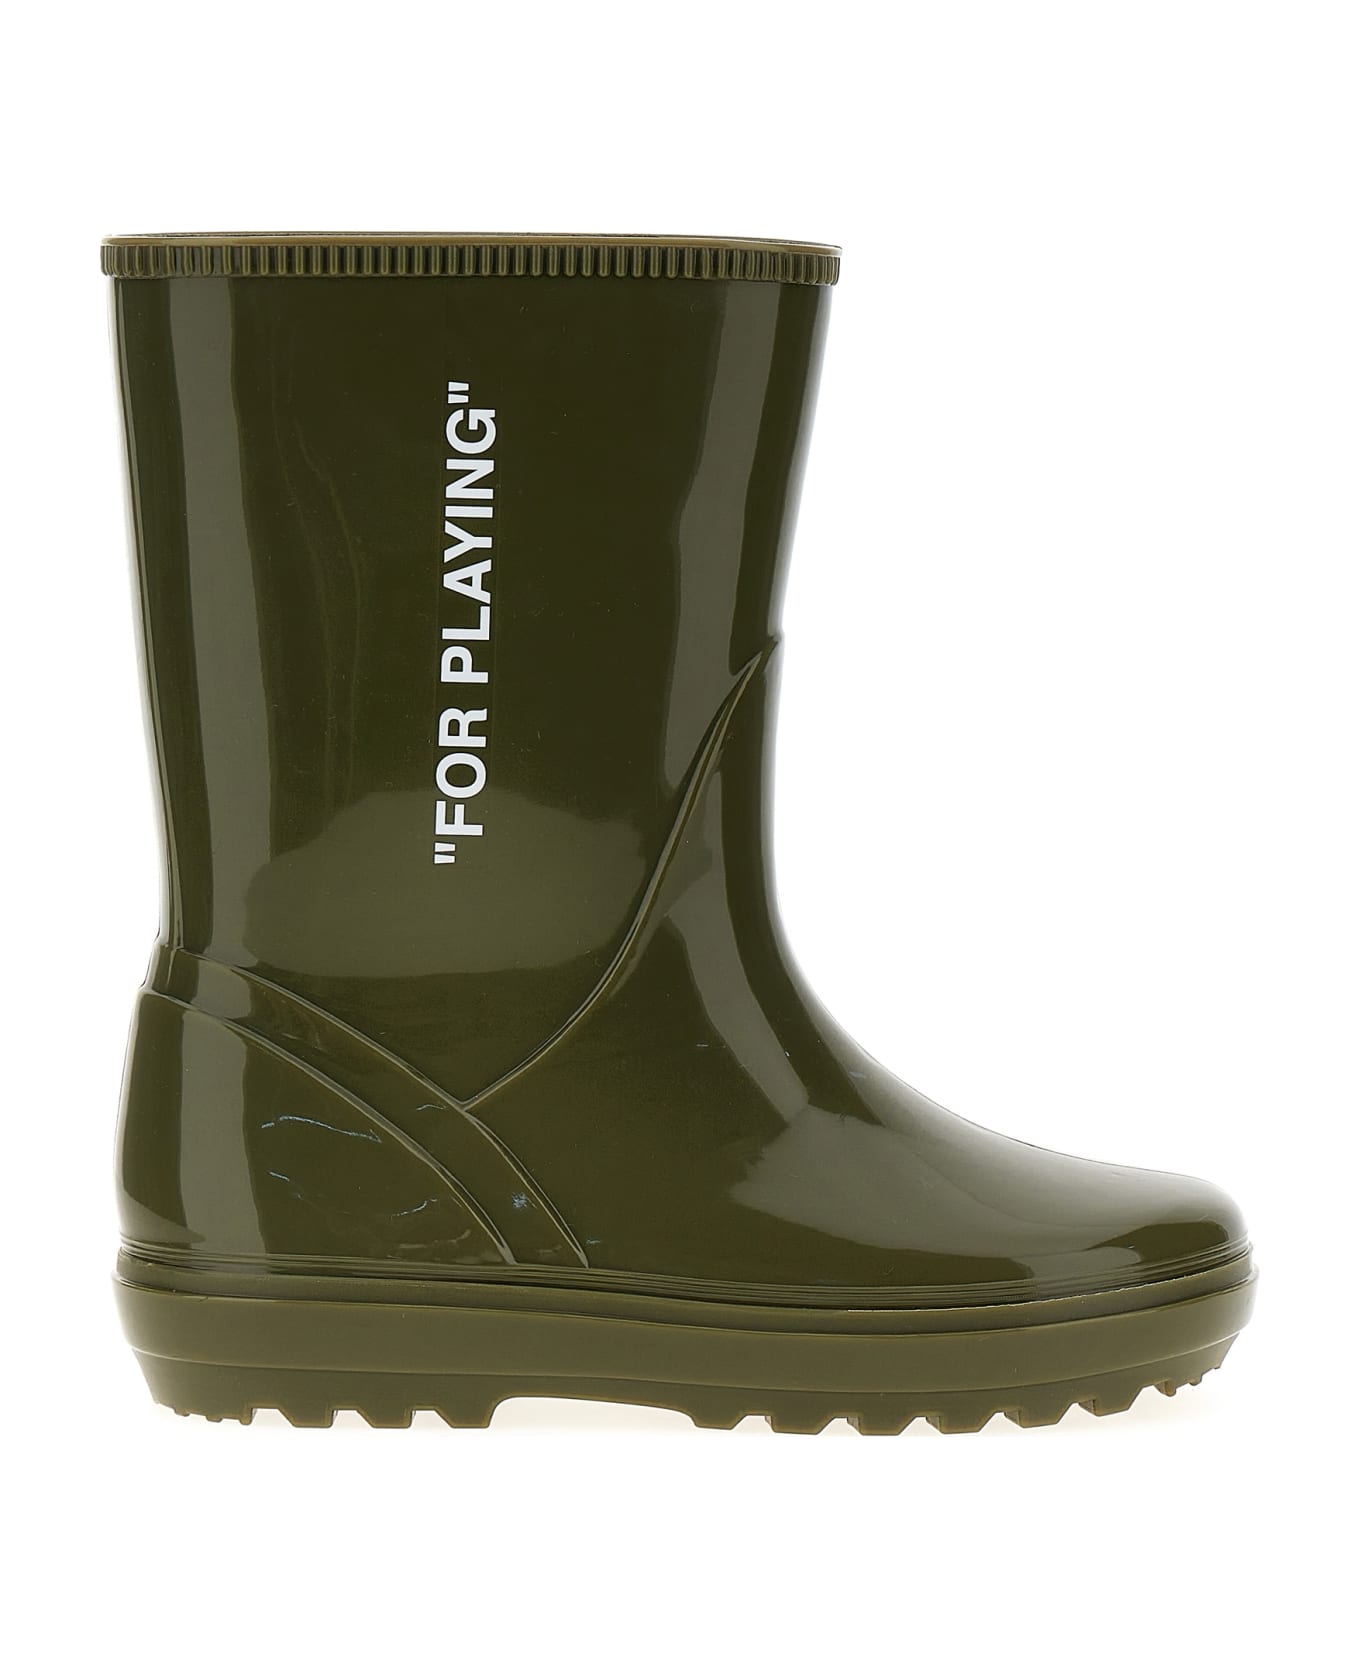 Off-White 'for Playing' Boots - Green